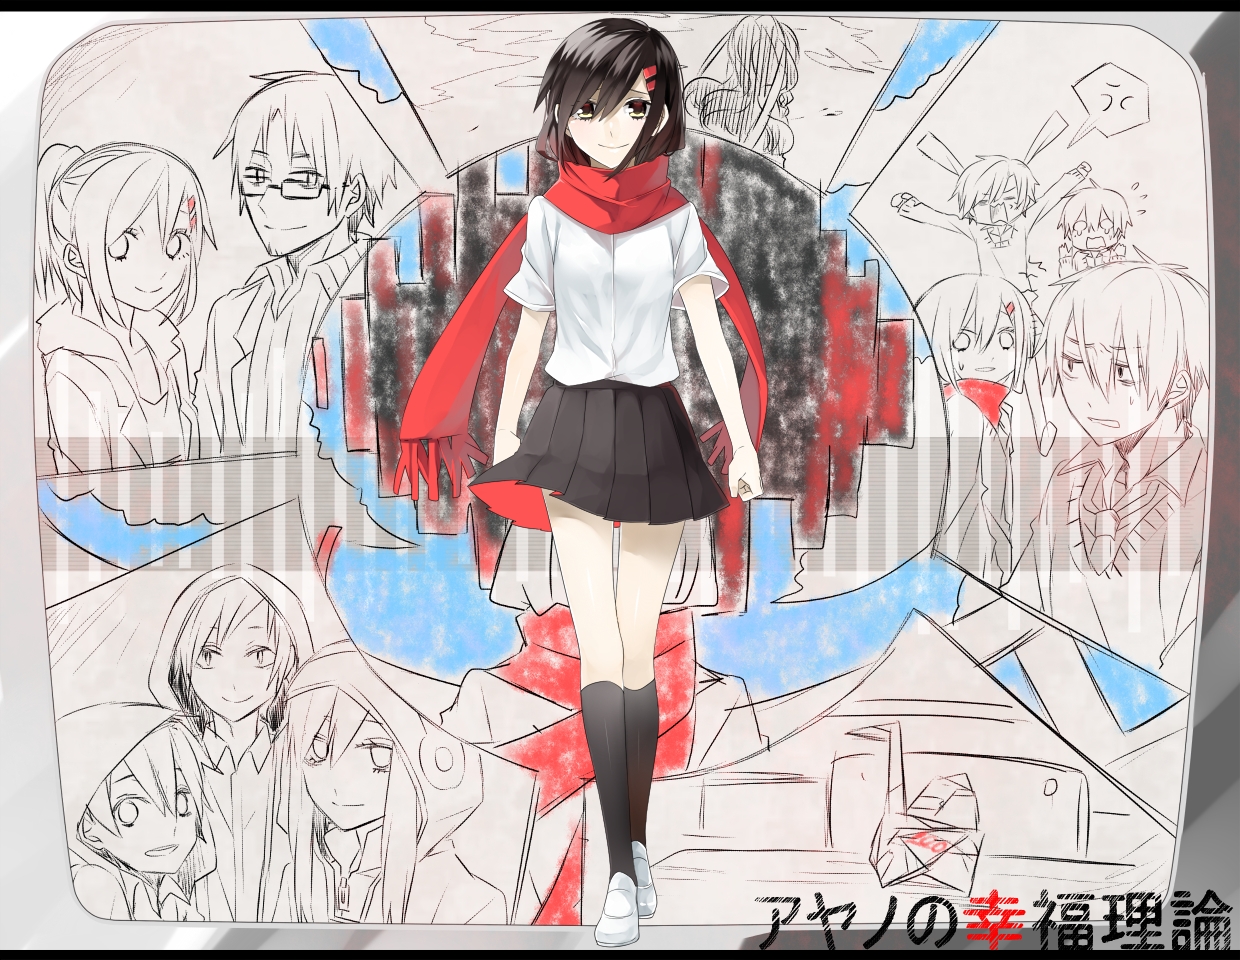 Ayano Theory of Happiness / Jin